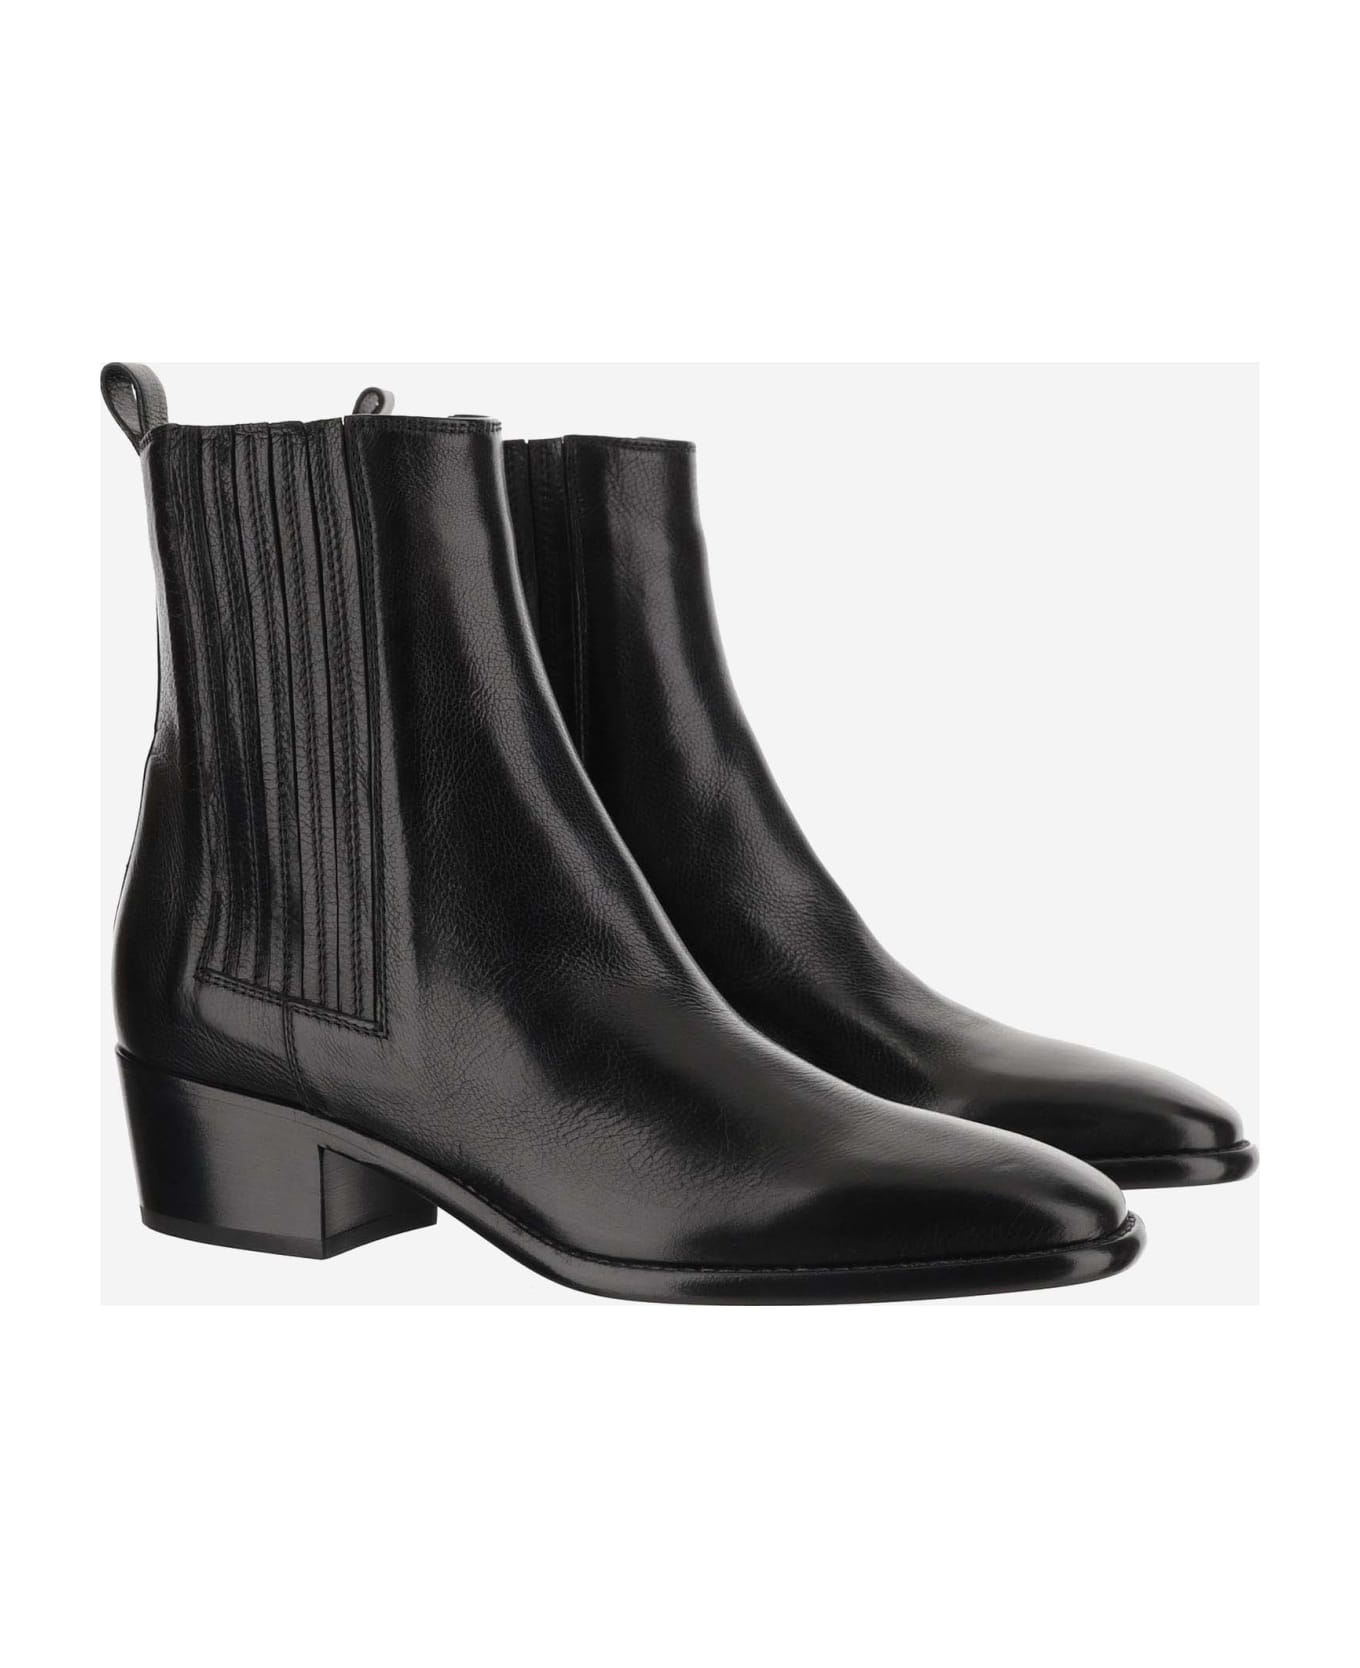 Sartore Glossy Leather Ankle Boots - Black